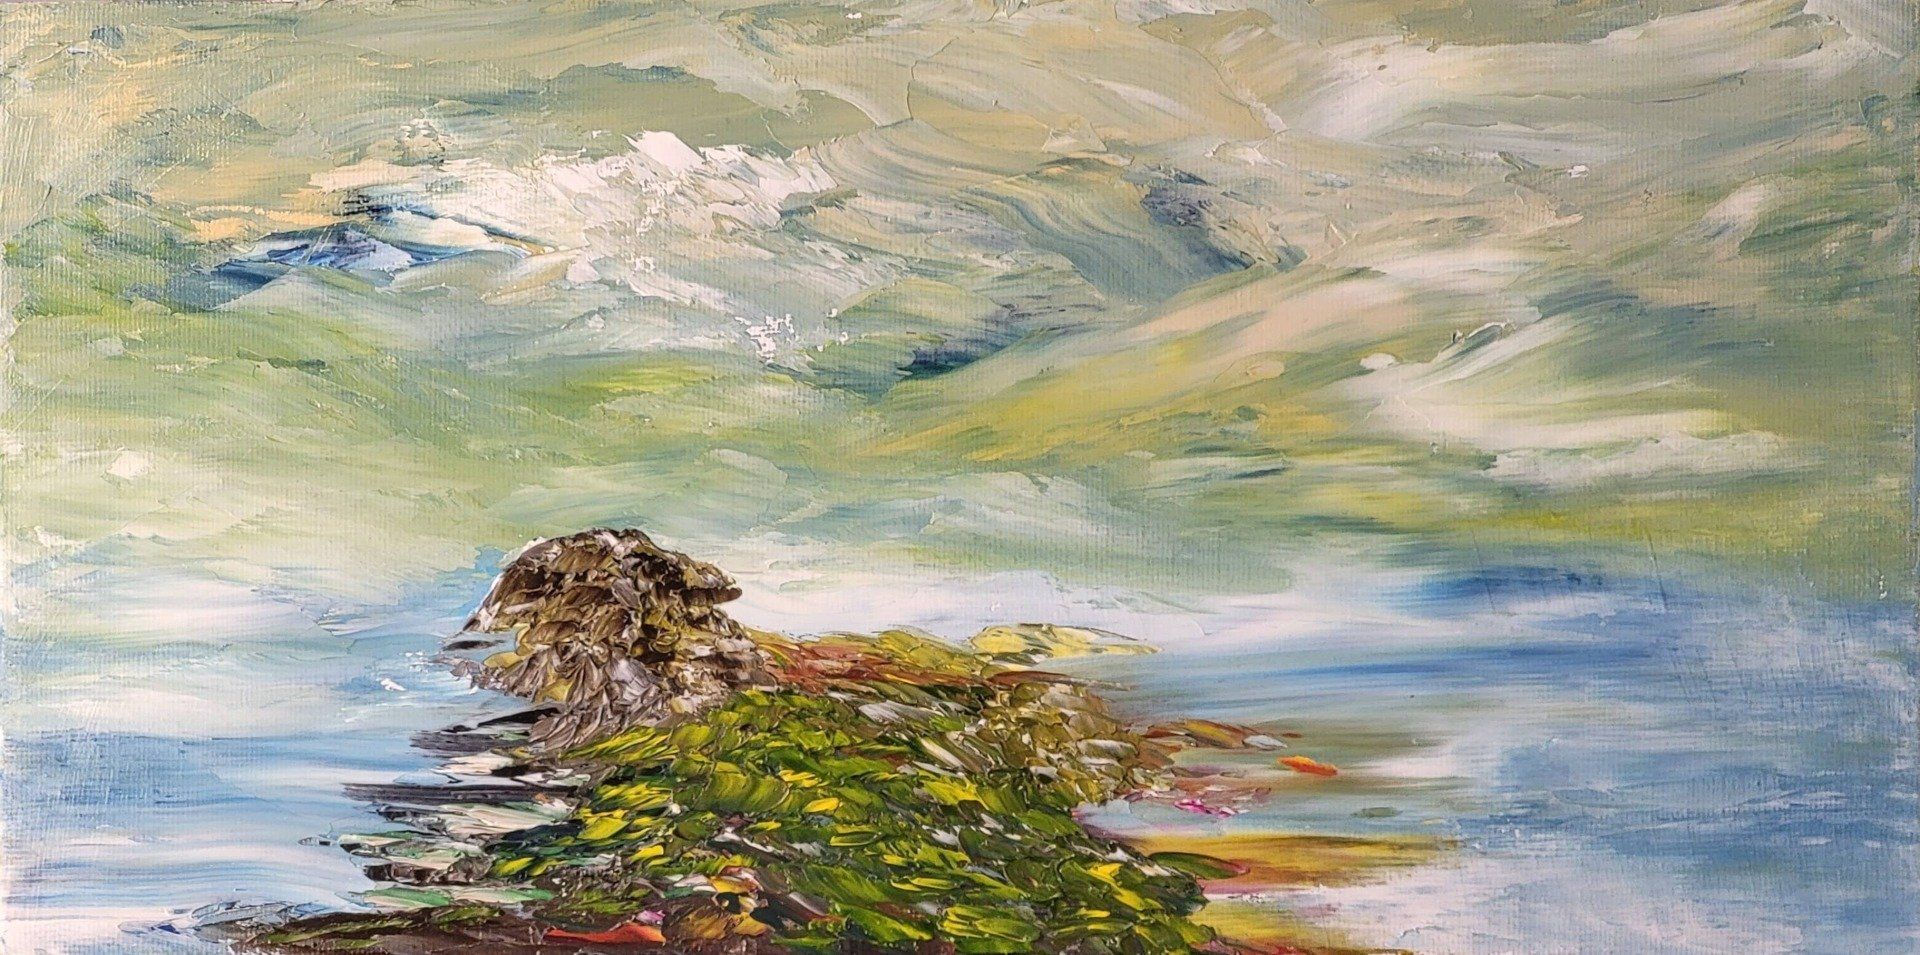 Island just for you (17) Oil on canvas Board 12 in. x 6 in. Along with the signature palette for the sky (Naples Yellow, Buff White, blues, and a touch of yellow) the cloud formation is active yet non-threatening. With a horizon that blends with the sky the sea is calm. The Island stretches from the base of the painting to almost ending at the middle. The foreground part of the Island is lush with greens and yellow hints of growth along with a rockish coast line on the left side and a sandy or earth tone coast on the right side. As the Island stretches to the middle of the painting it turns into a mountain with hints of earth tones and rock.